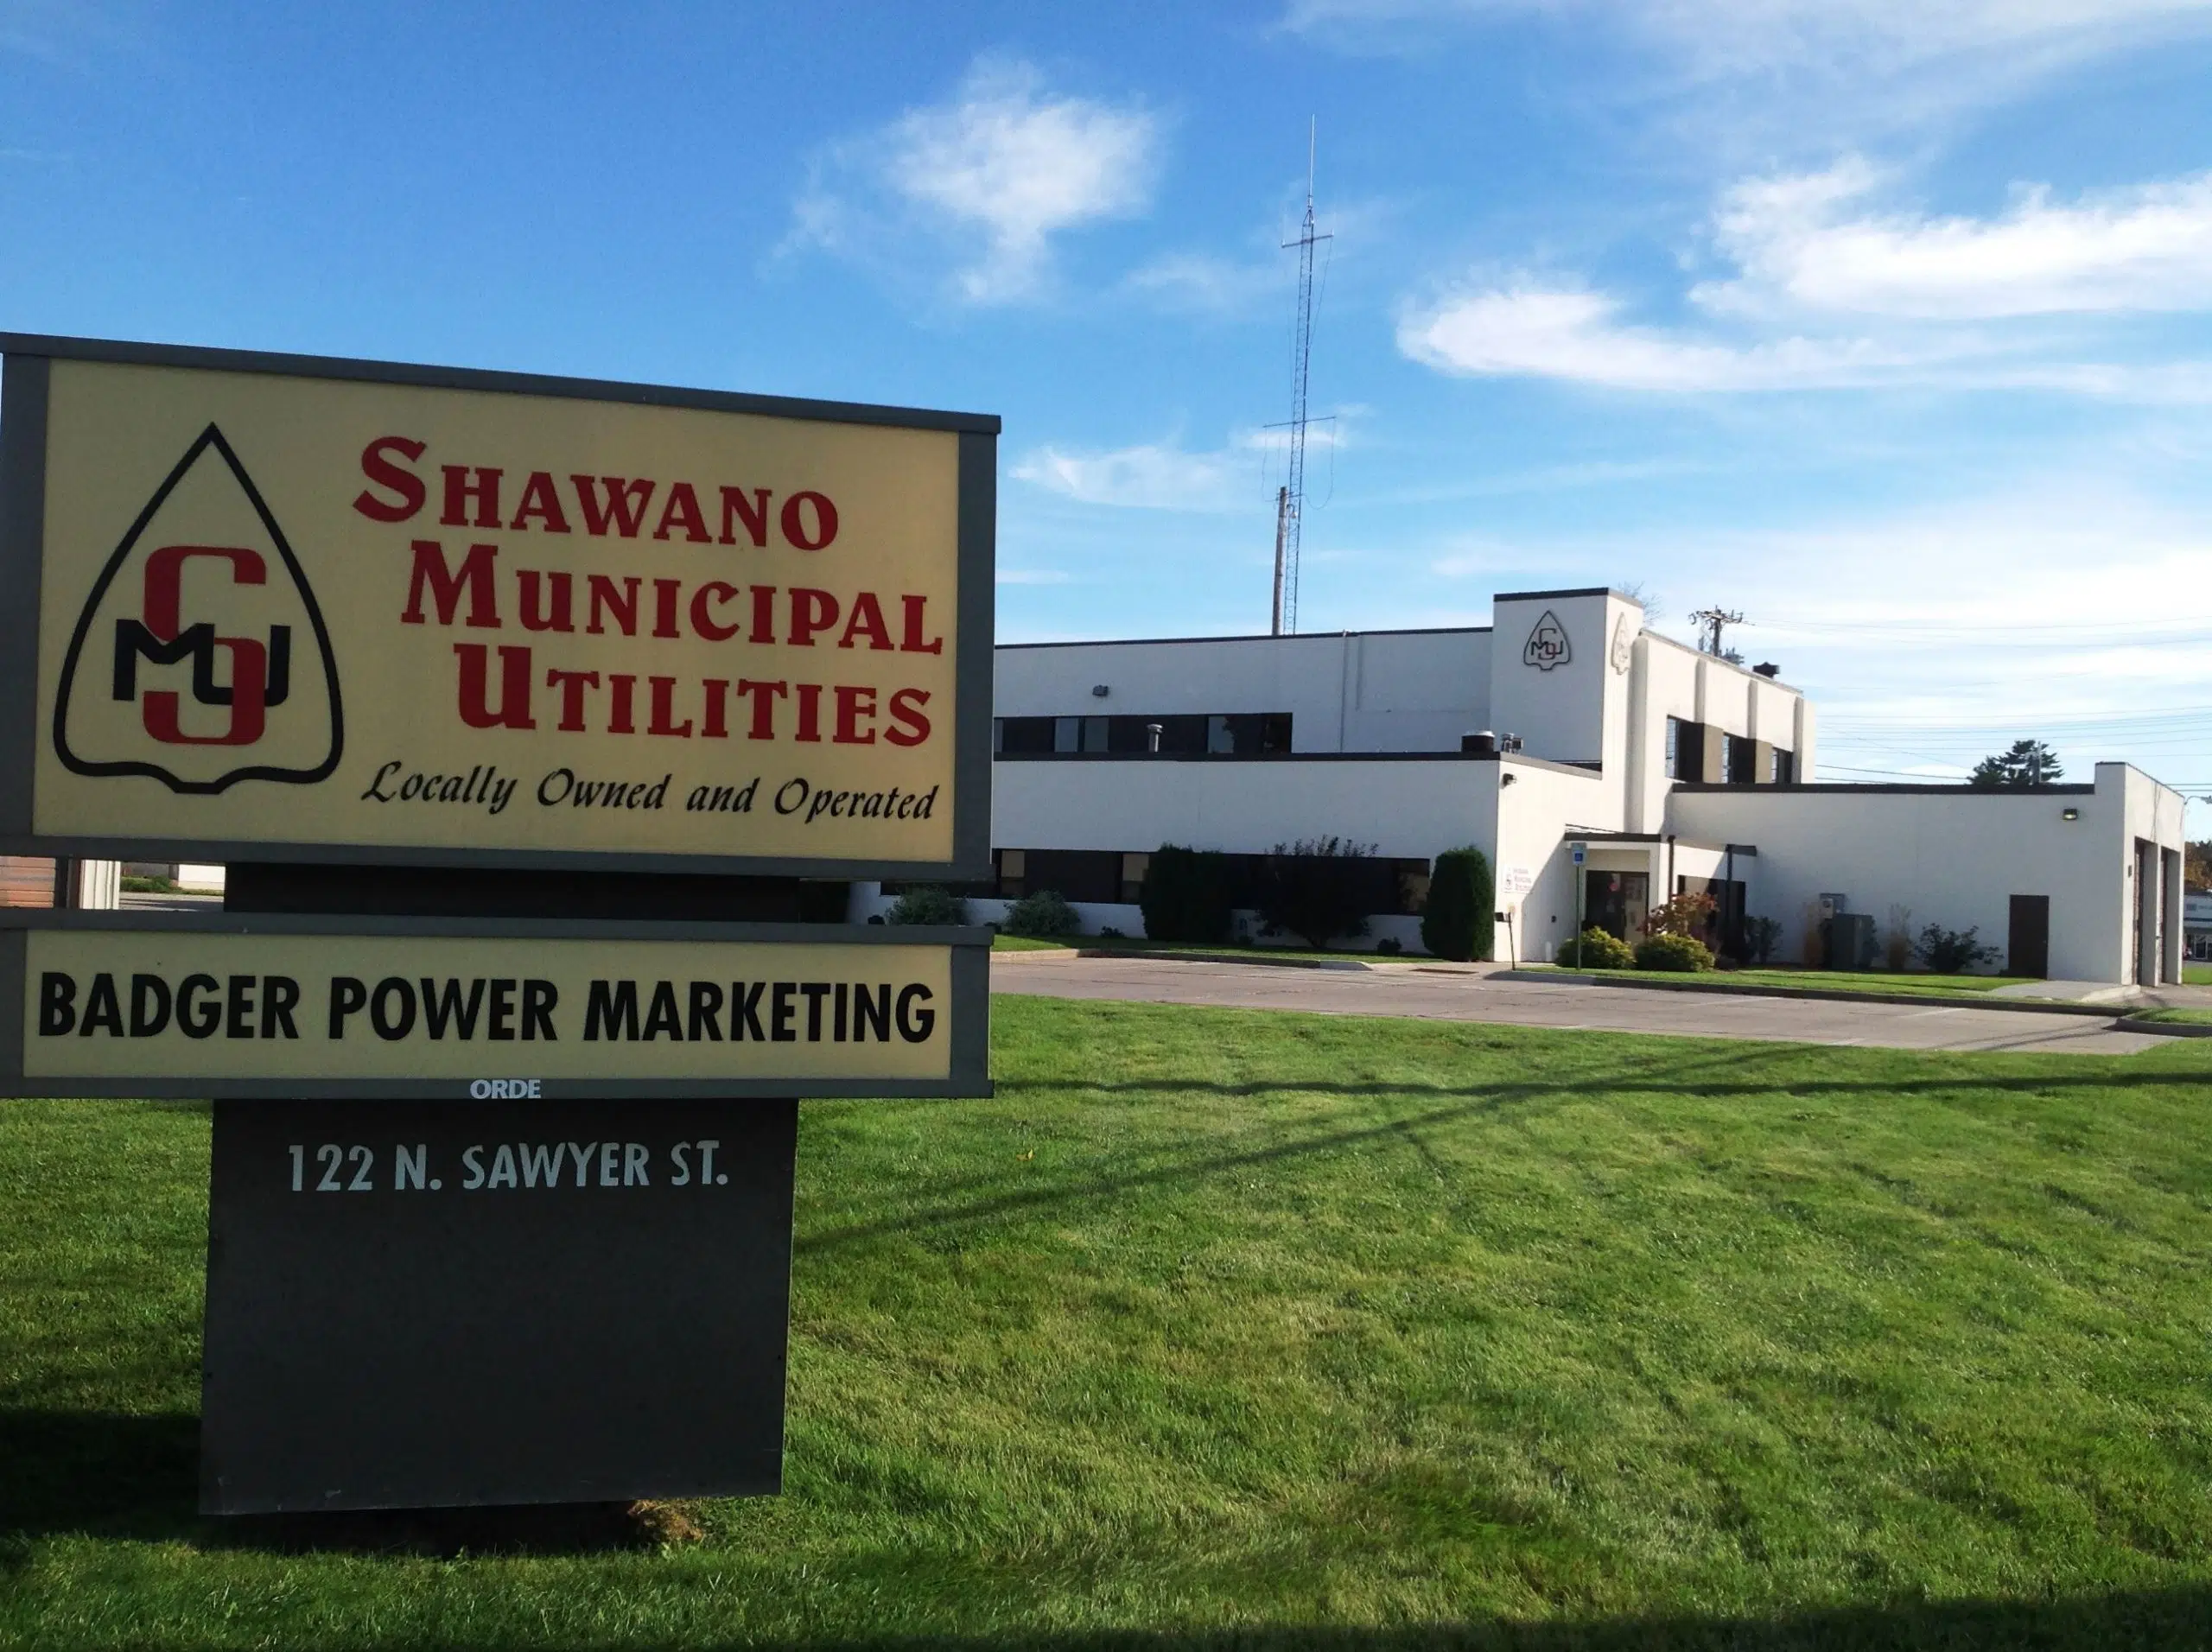 LISTEN: Equipment Failure Leads To Shawano Power Outage